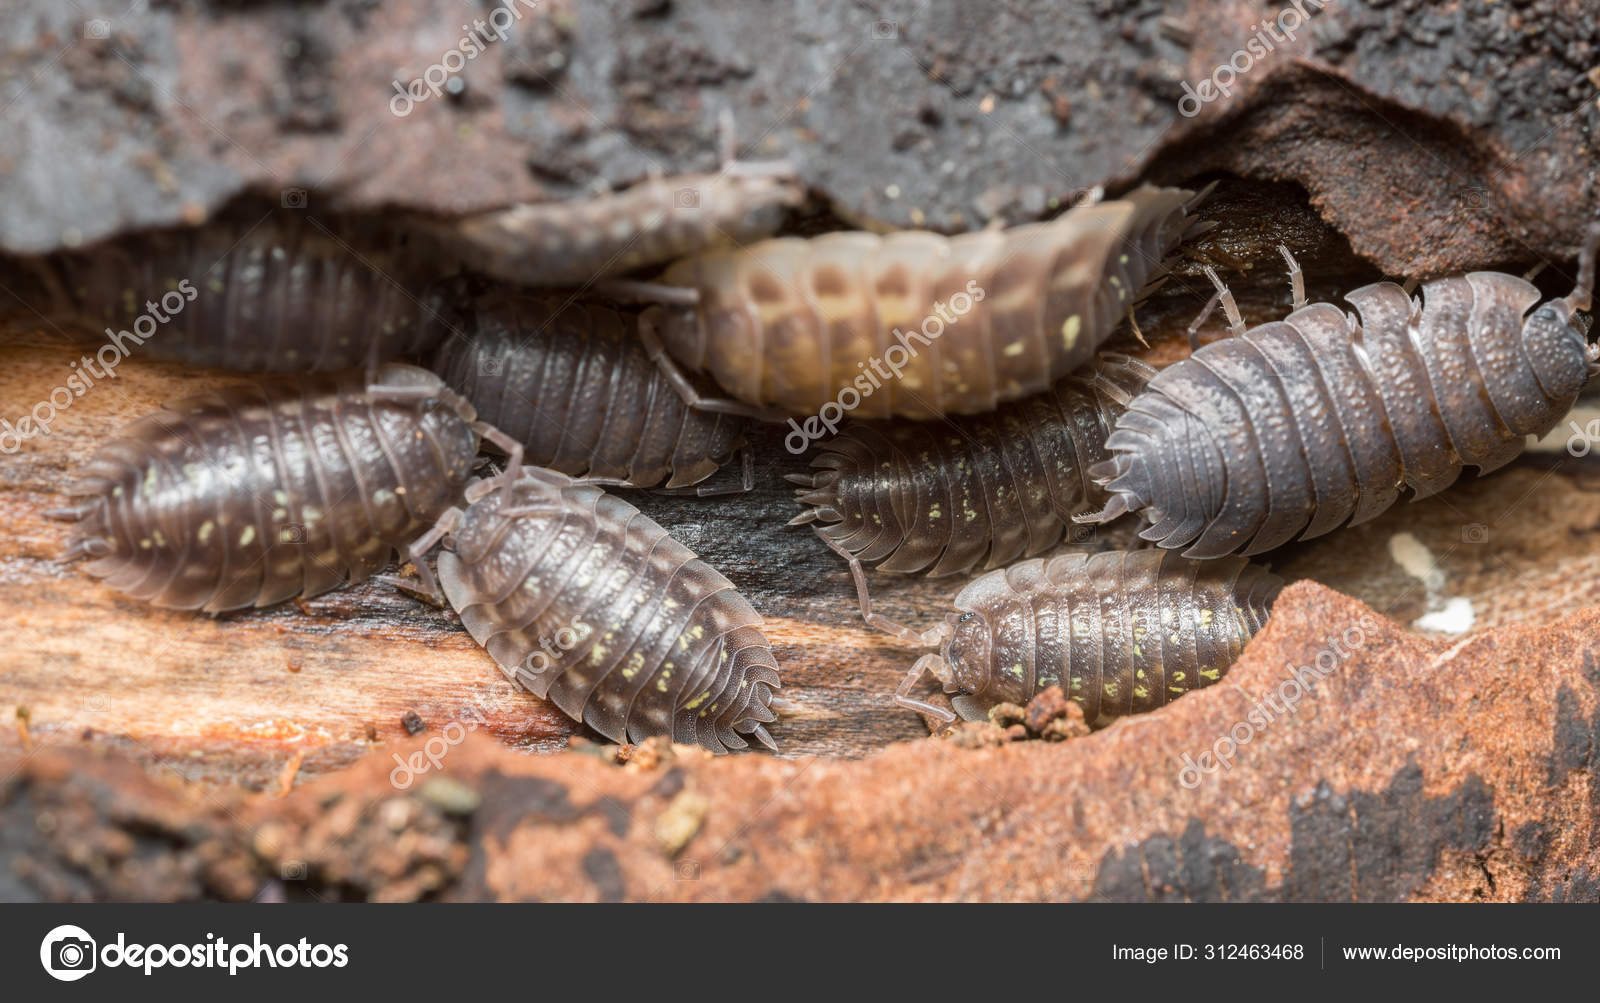 212 Woodlice Stock Photos Free Royalty Free Woodlice Images Depositphotos